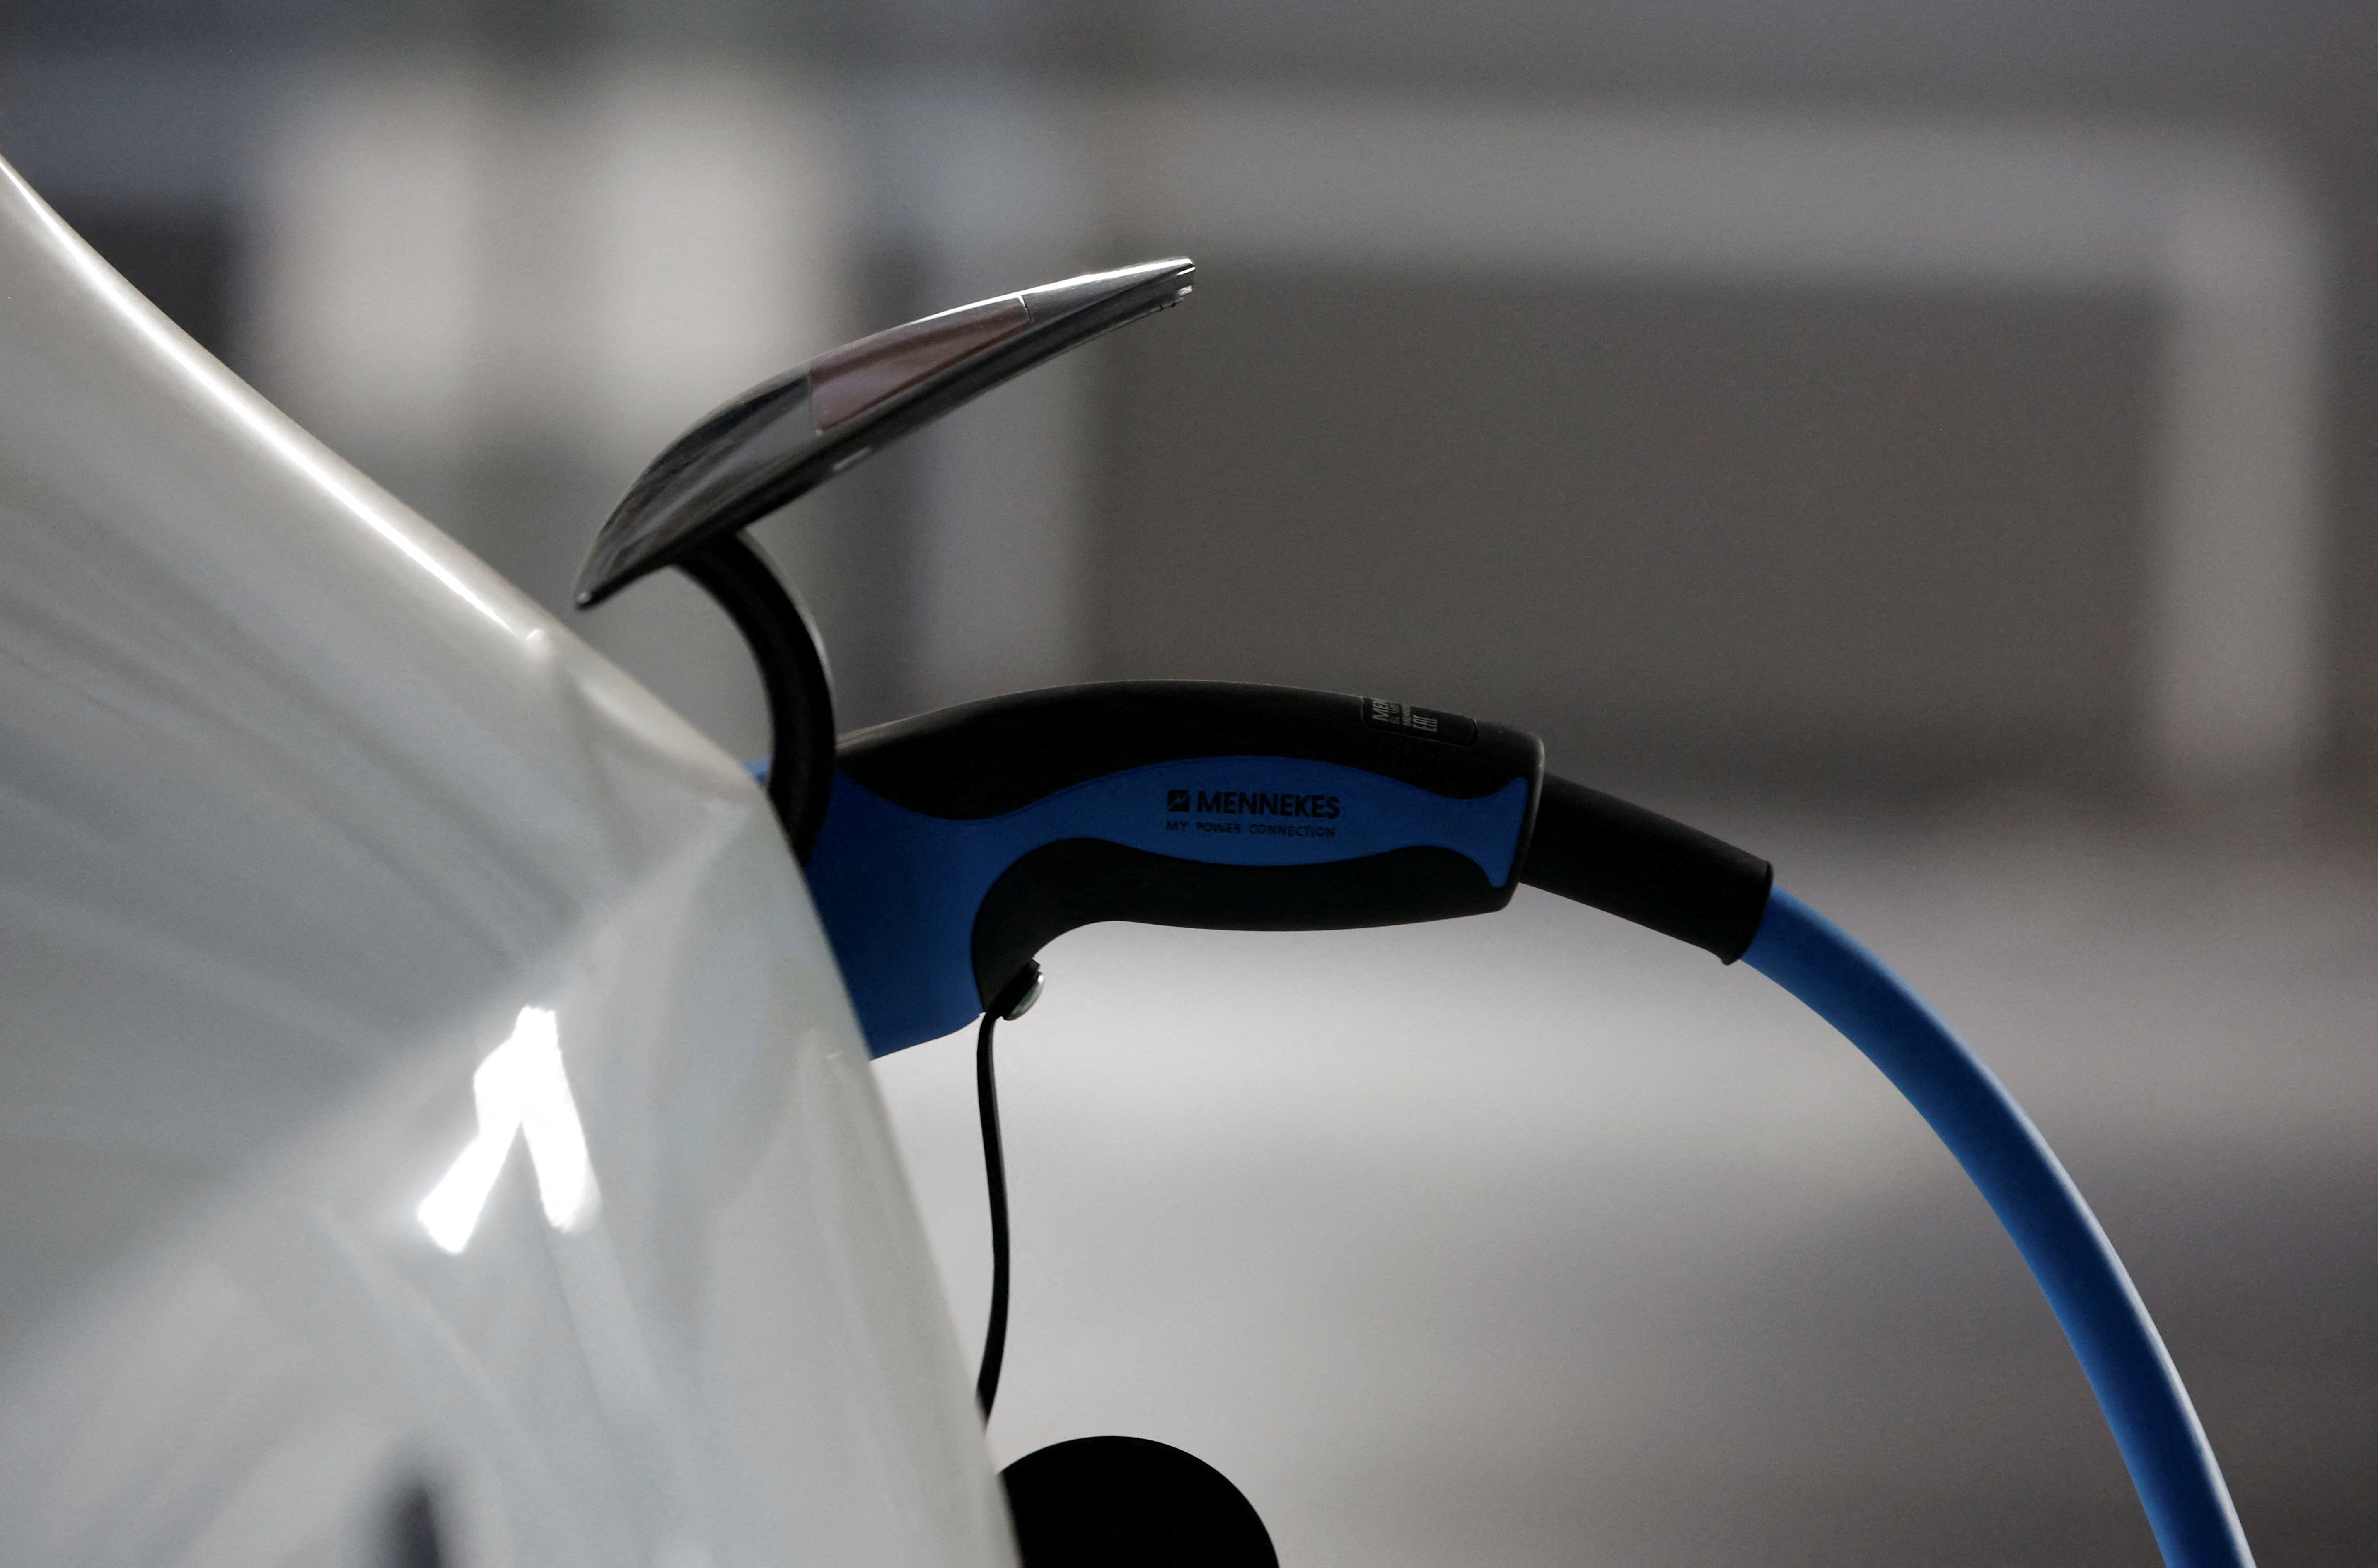 EV charging growth plans slowed by EU's power grid problems